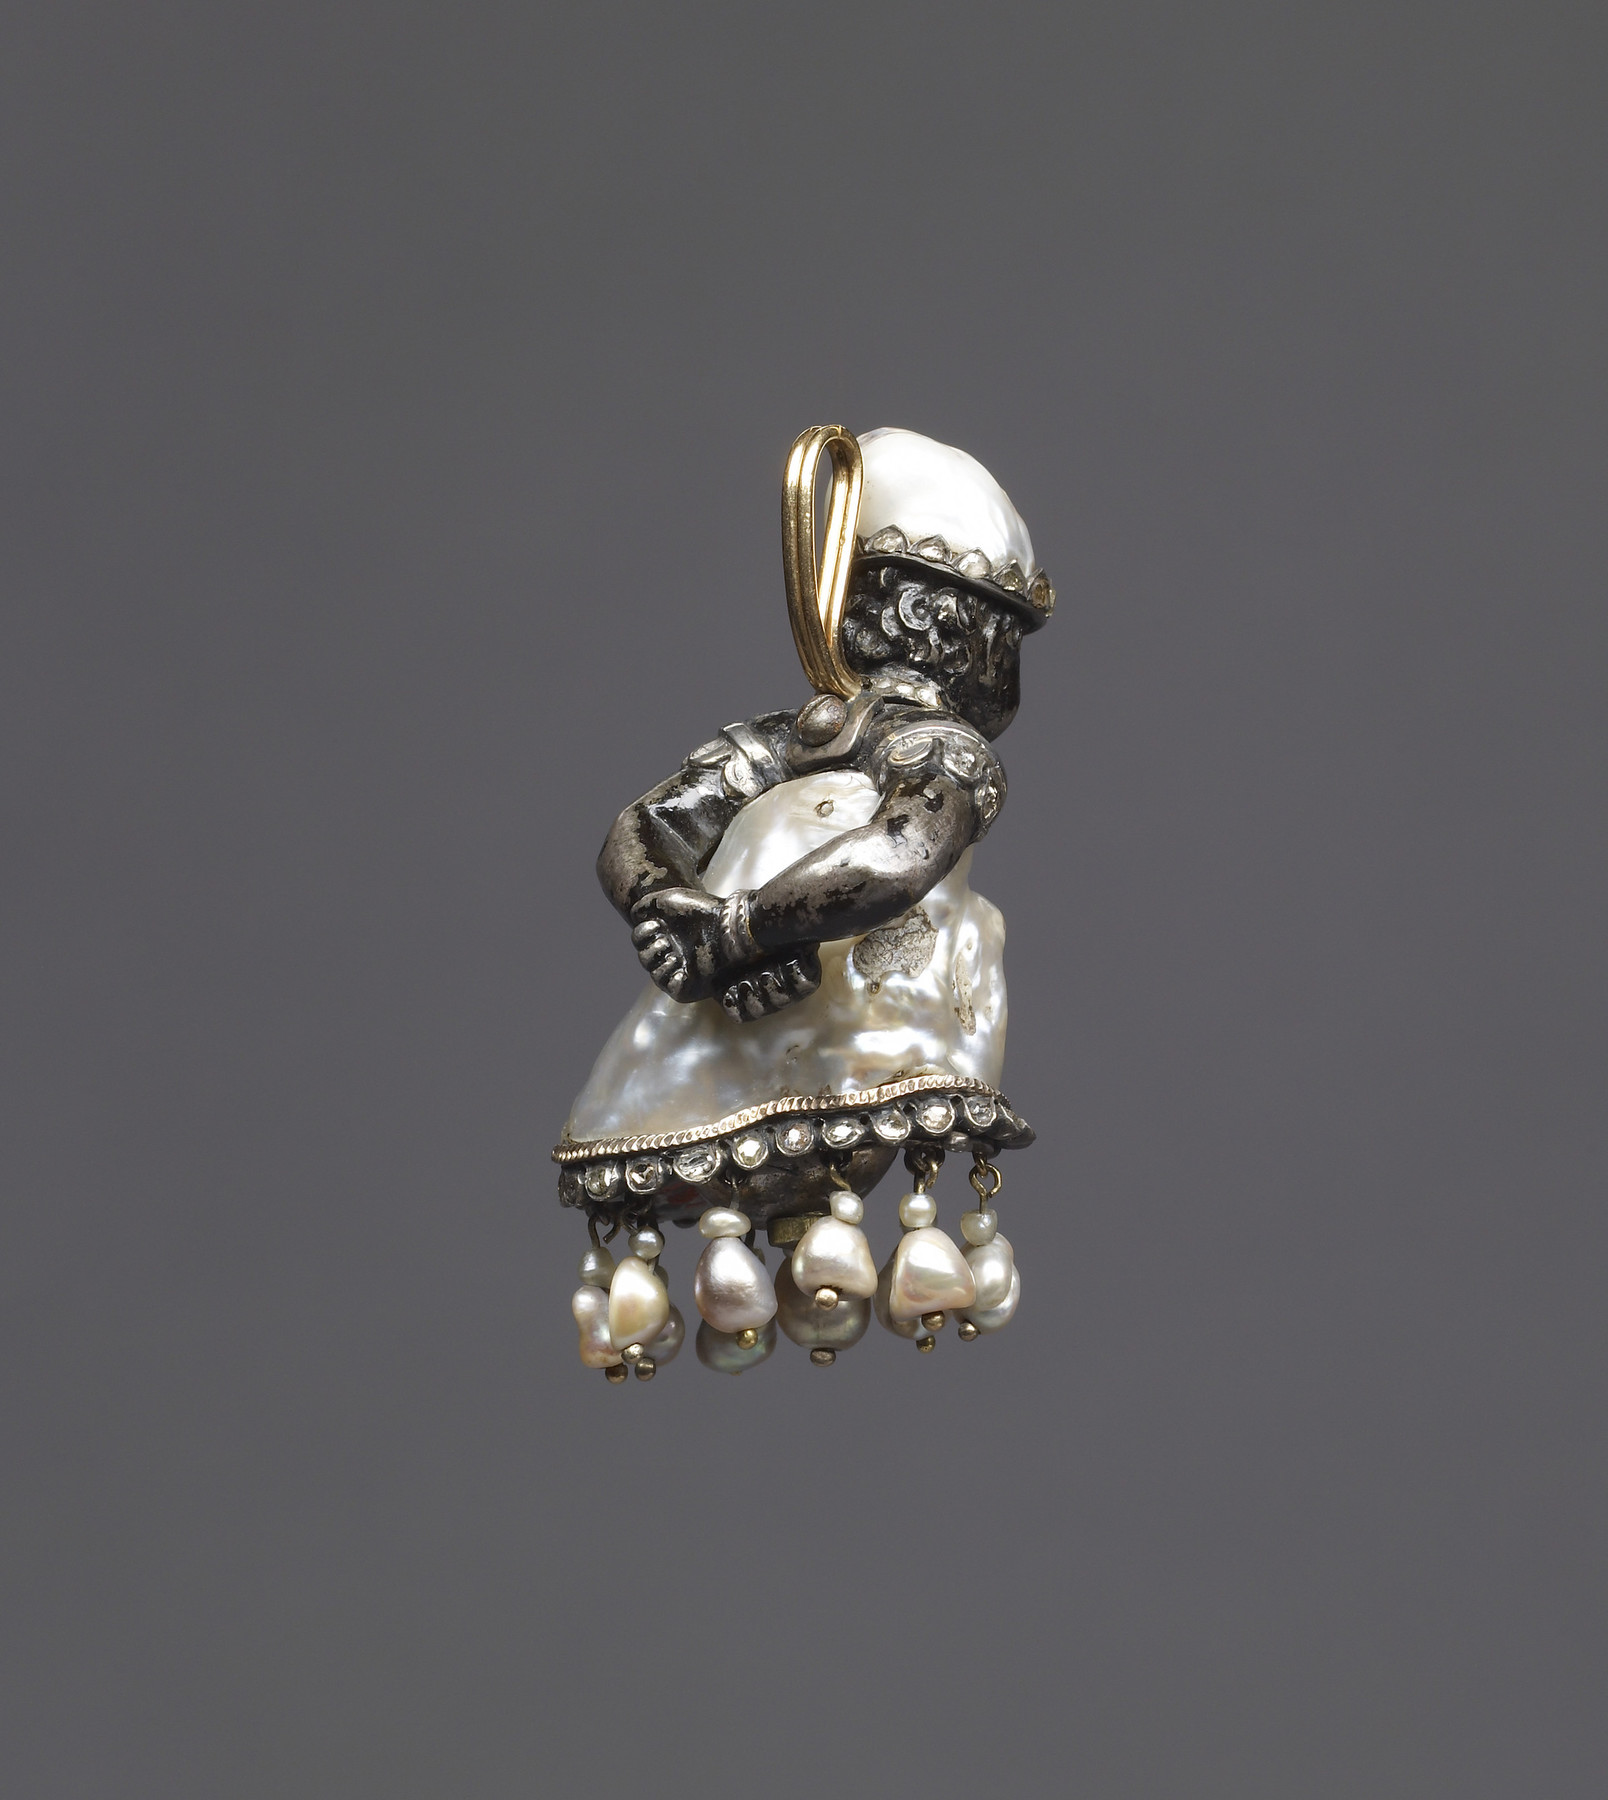 Image for "Pearl Figure" of a Black African Captive